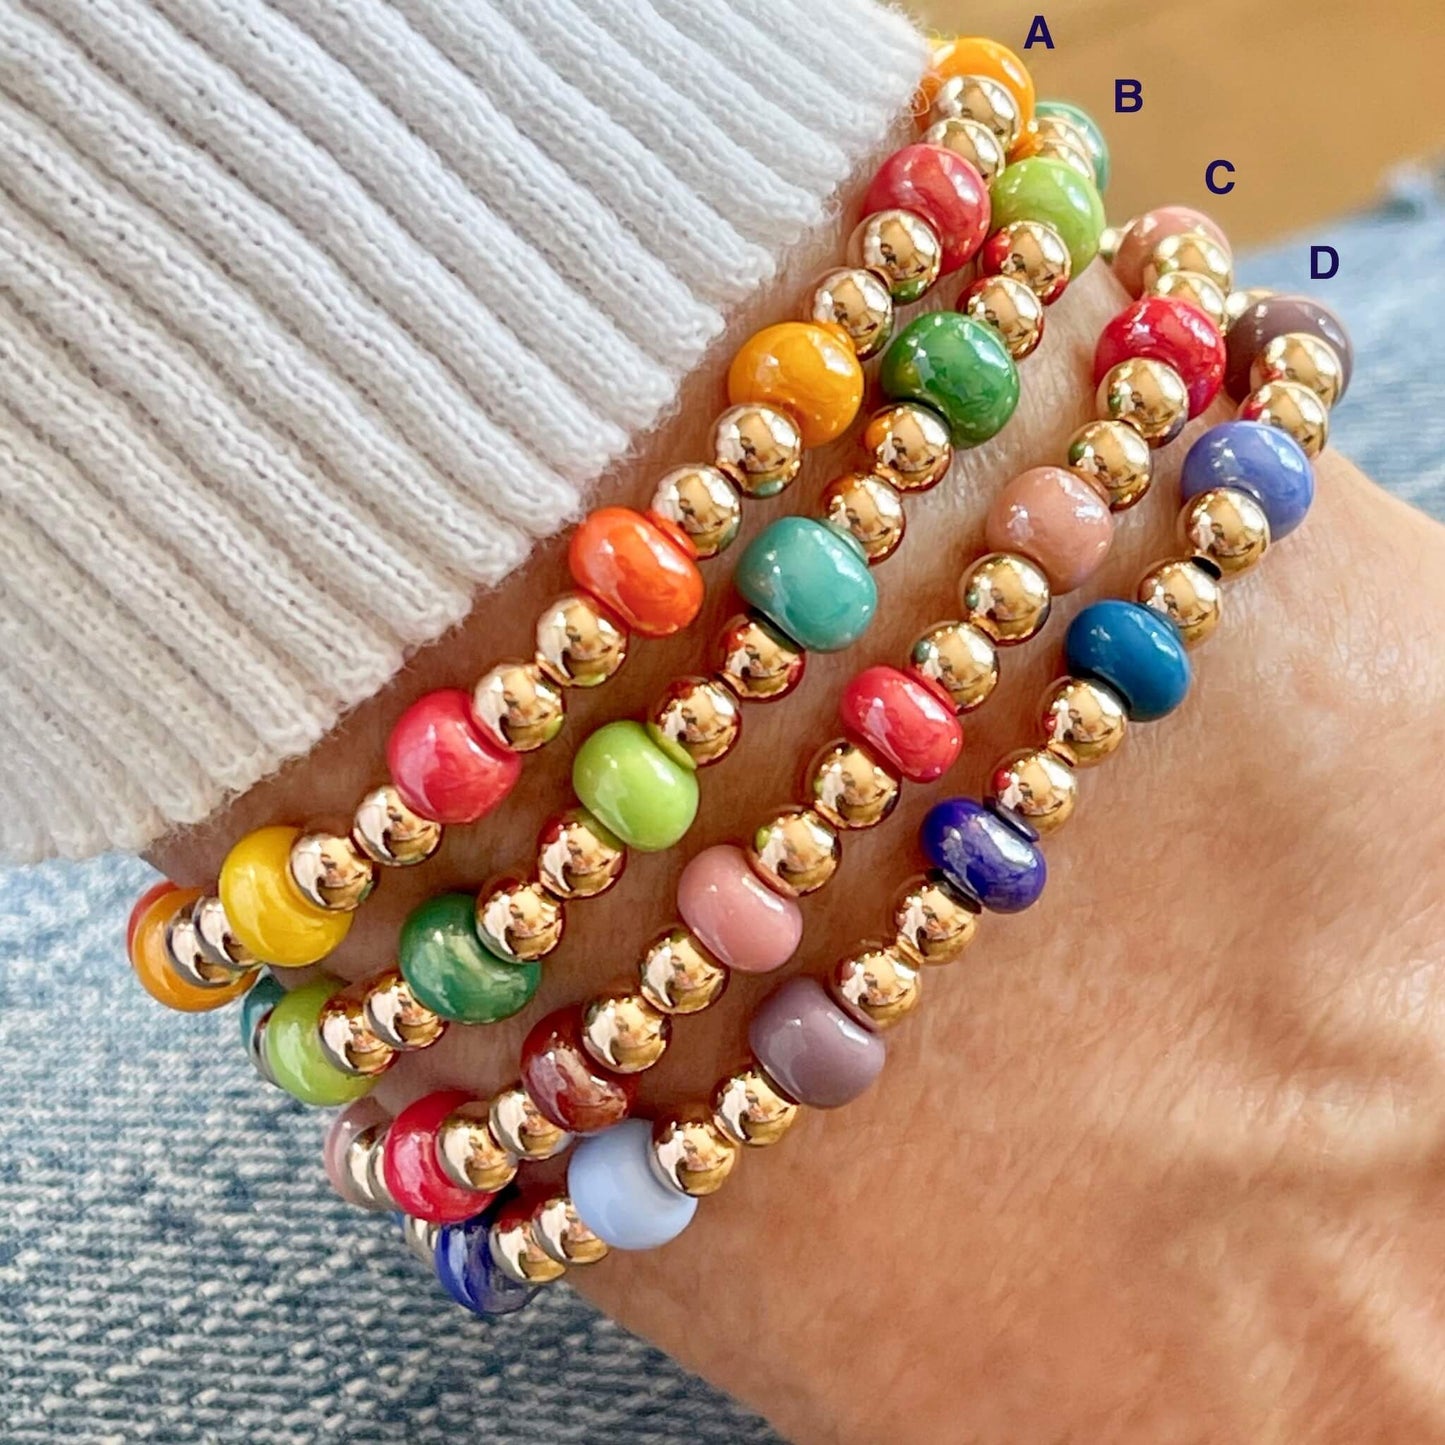 Beaded bracelets with rose gold-filled beads and monochromatic mixes of glass beads in reds, oranges, greens, and blues.